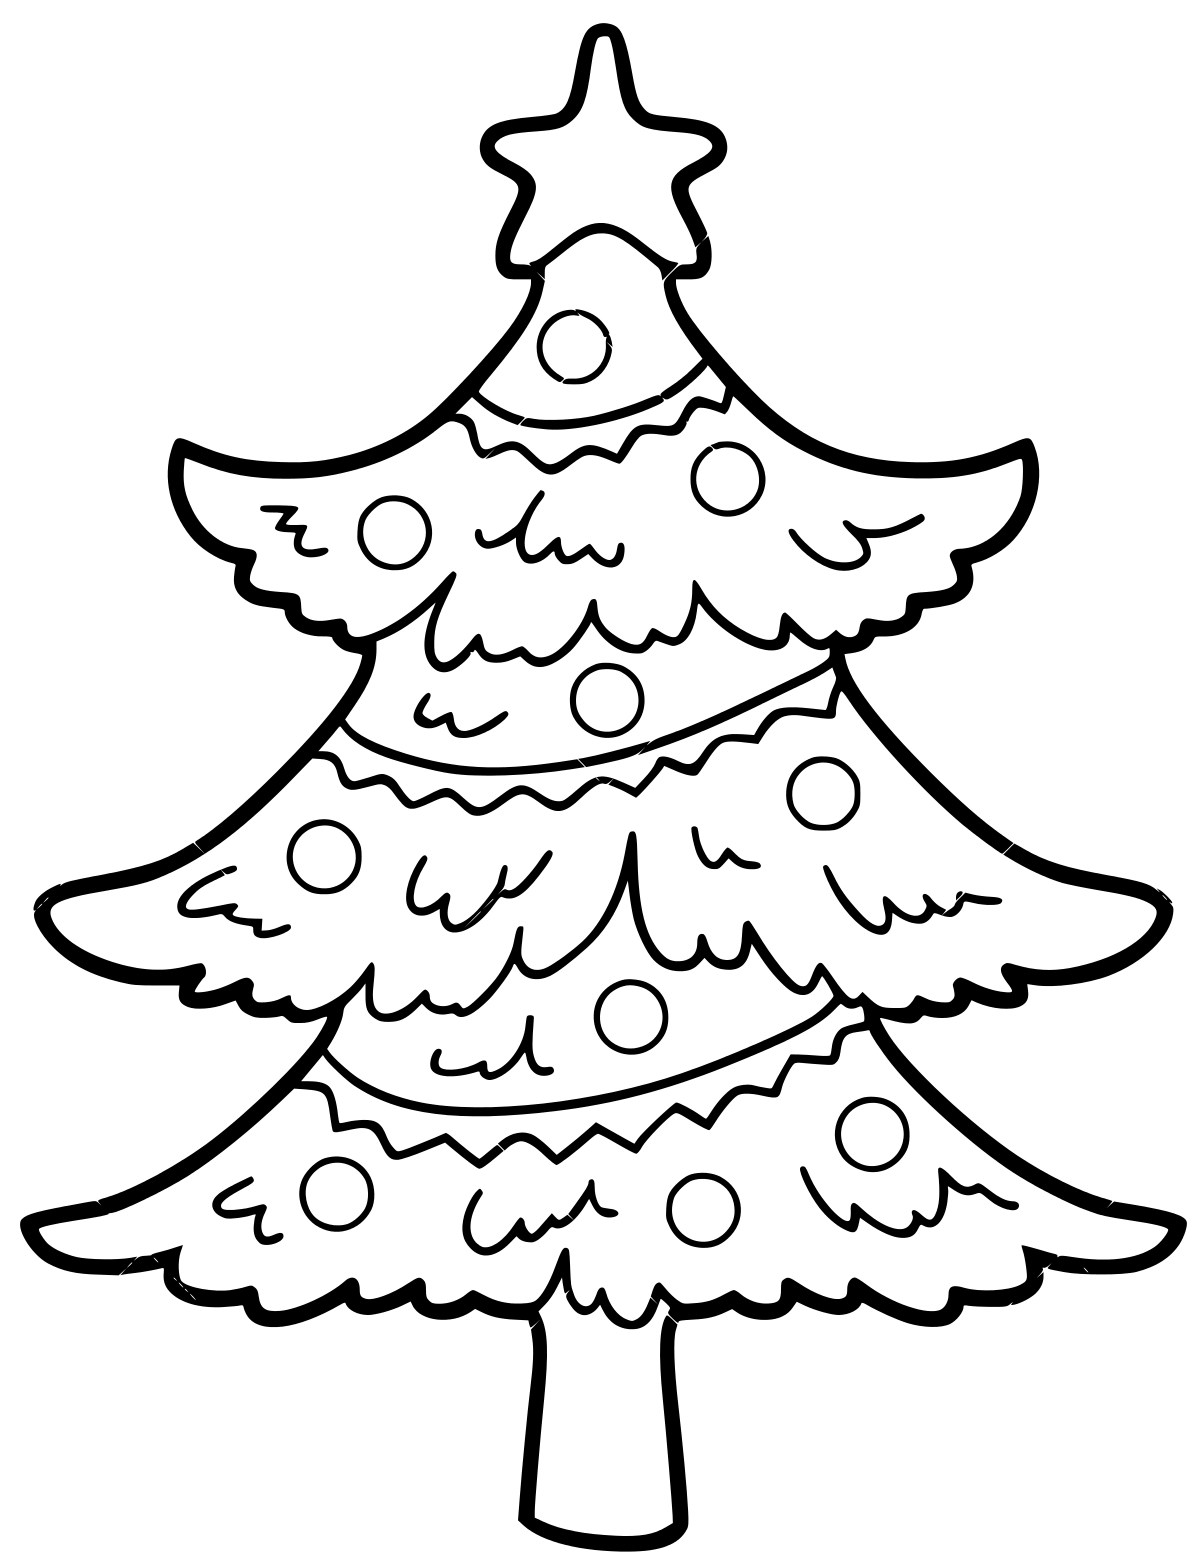 Creative Christmas Tree Coloring Page